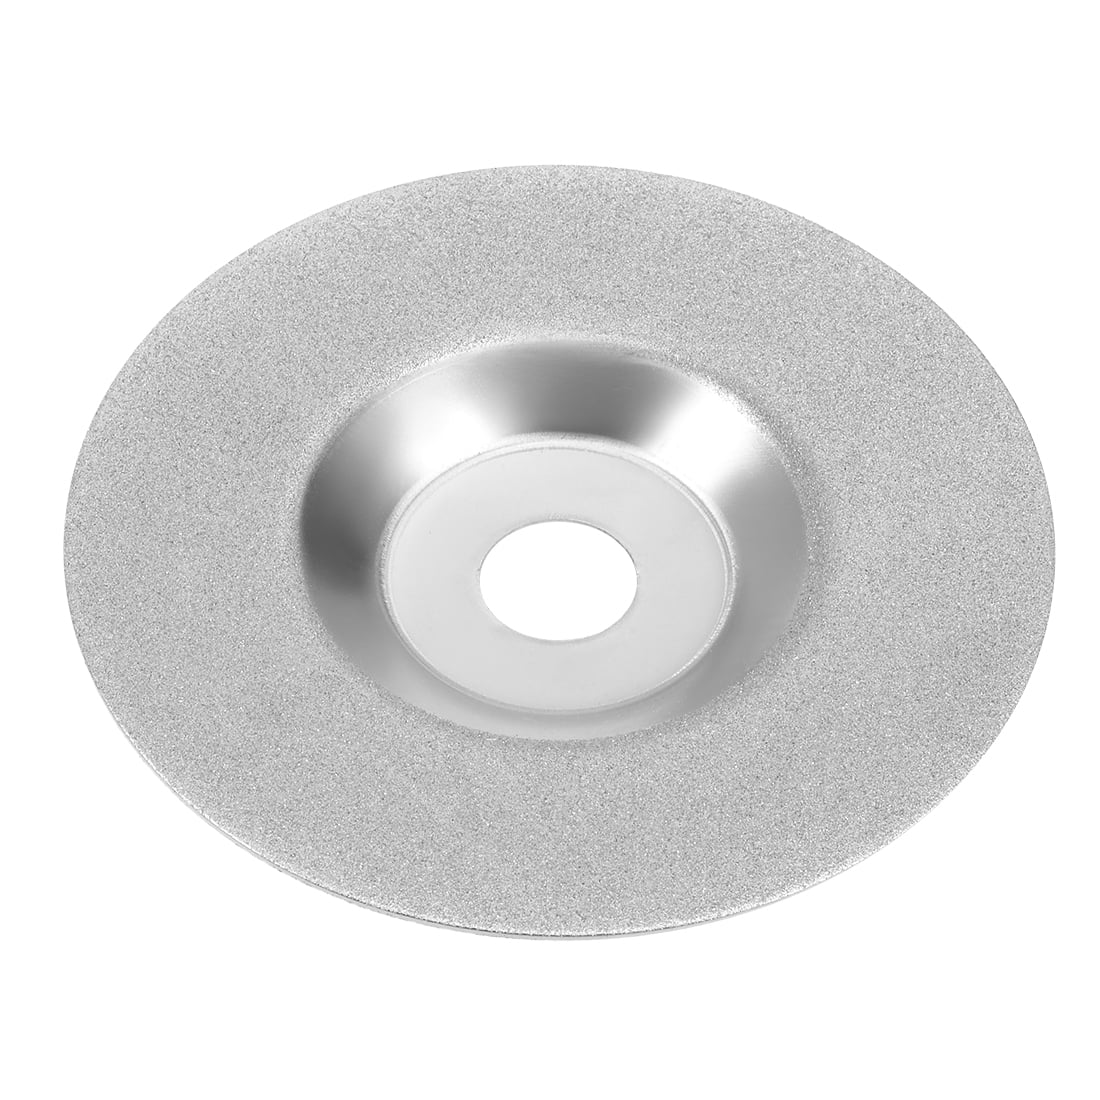 Diamond Grinding Wheel 4-Inch Outside Diameter Cutting Wheel Round Cutting Disc for Glass Marble Ceramic Tile 